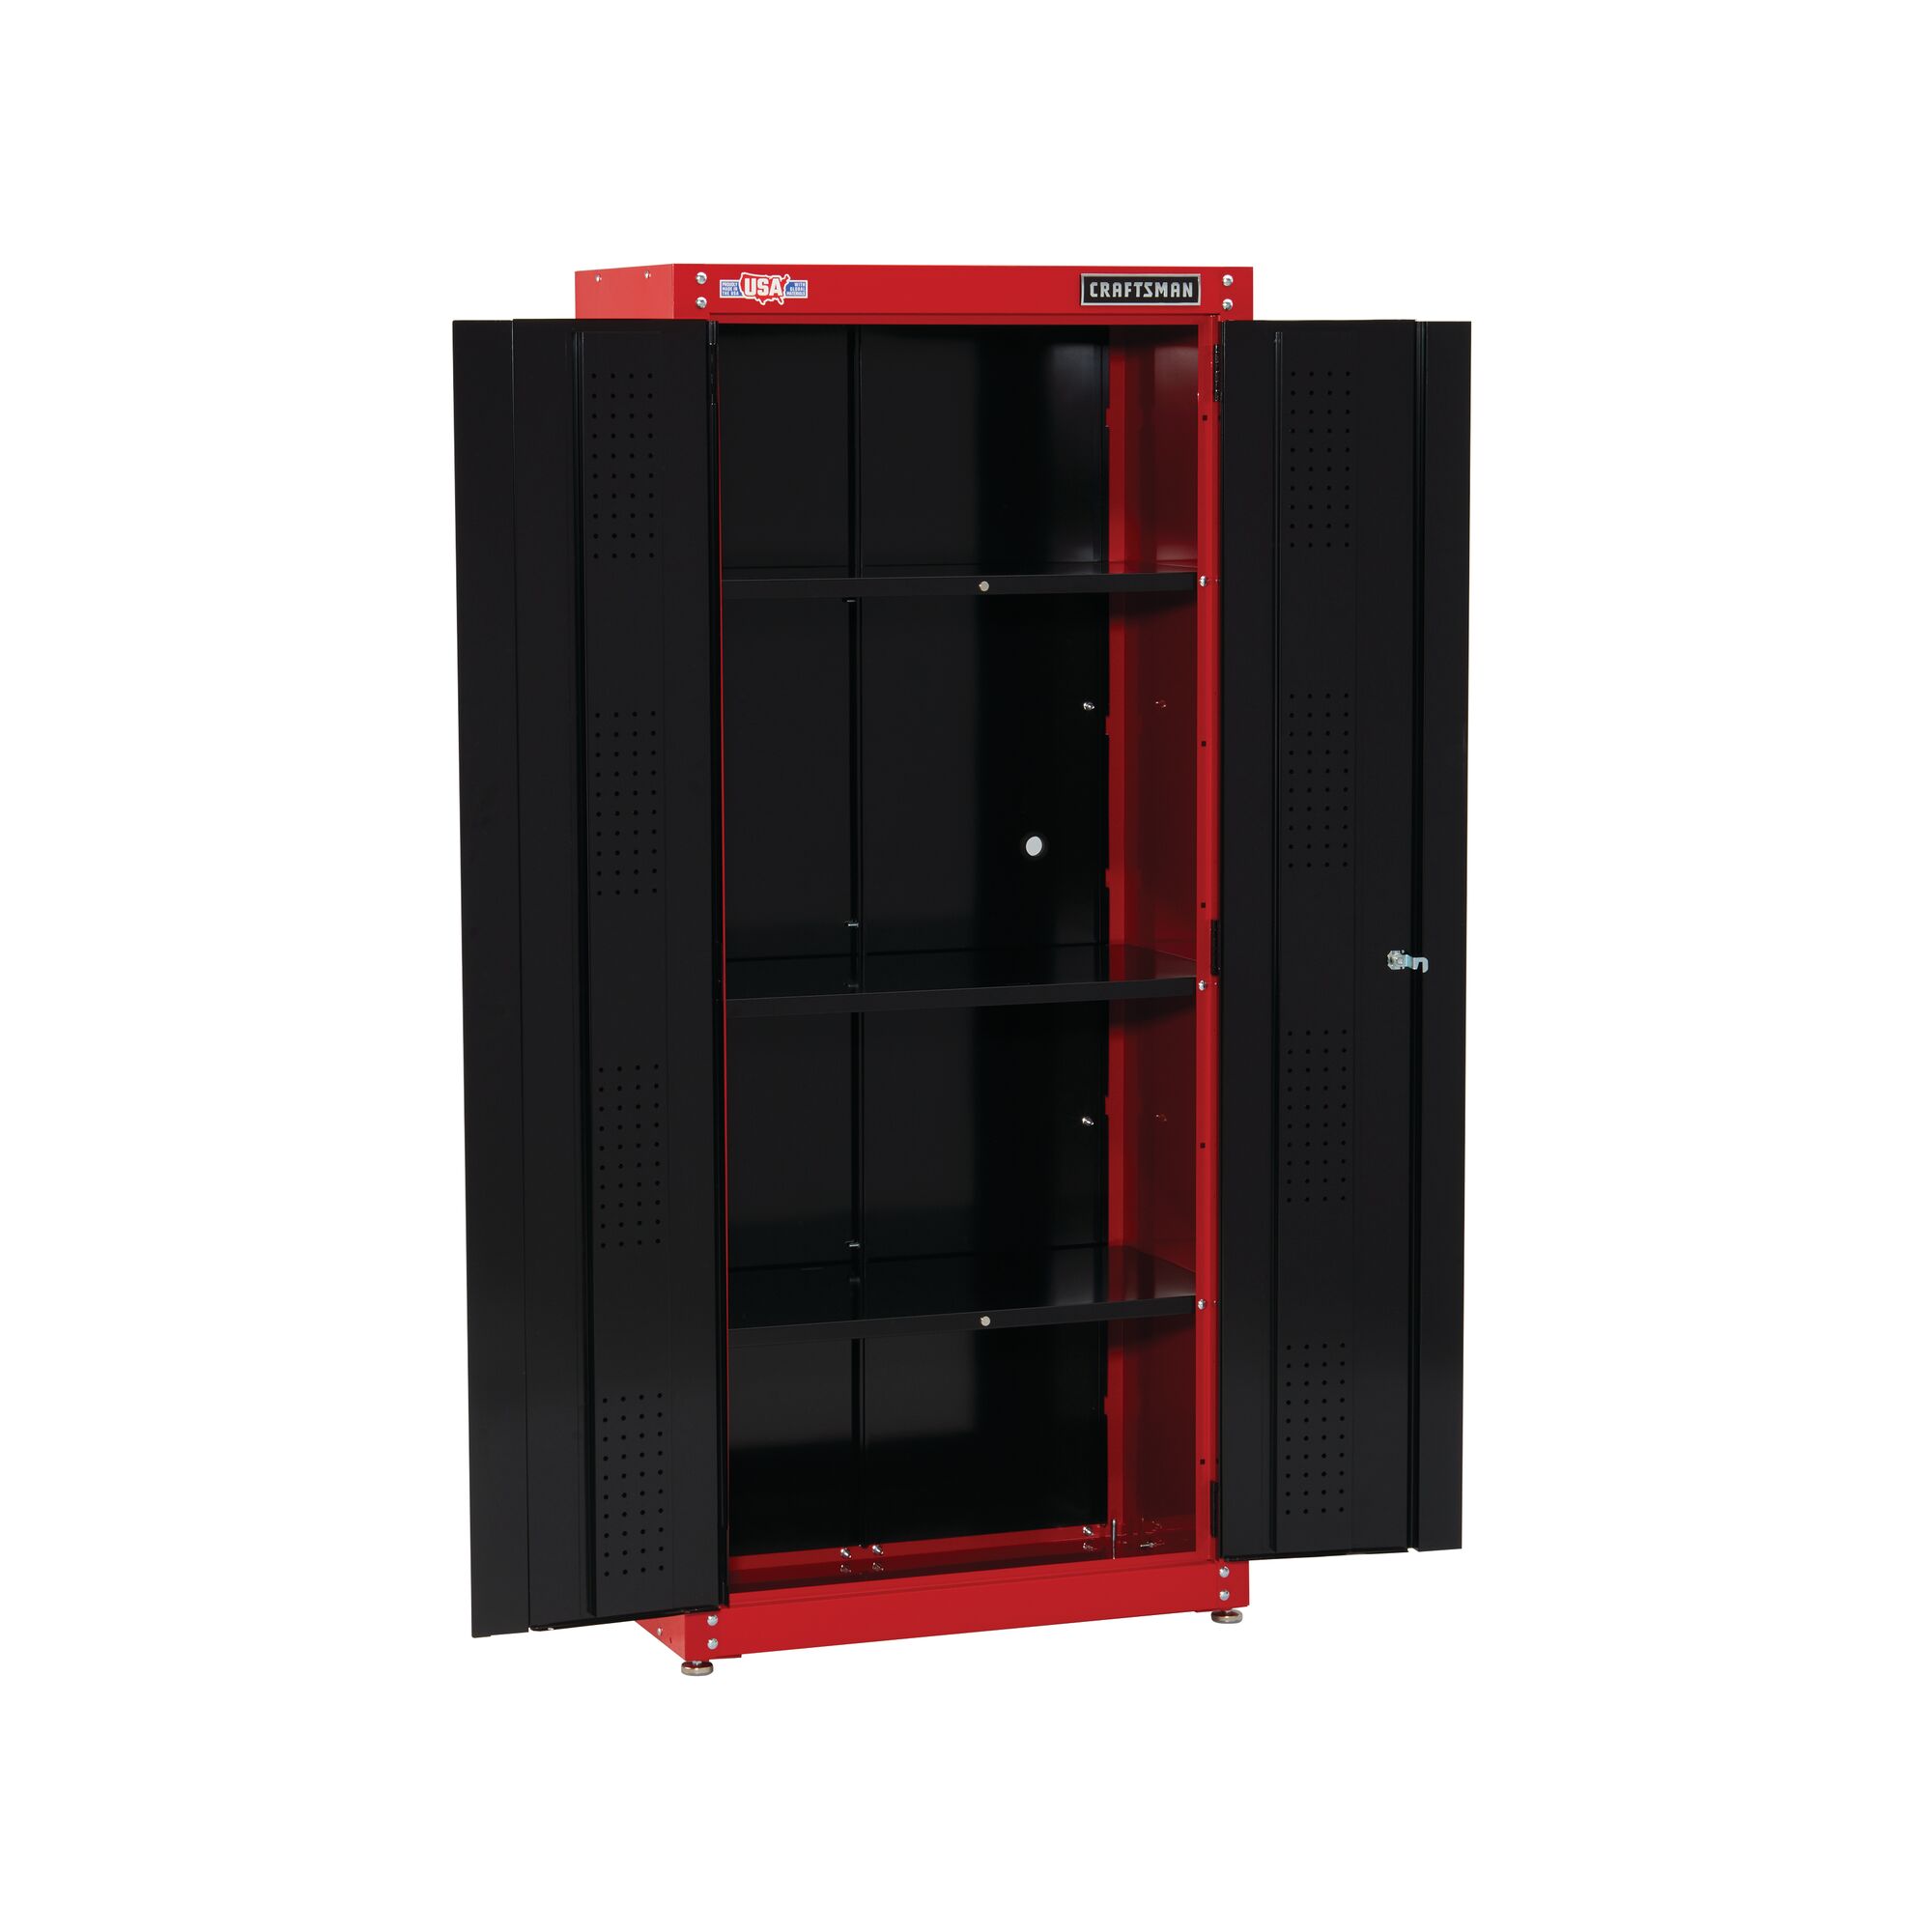 Profile of 32 inch Wide freestanding tall garage storage cabinet doors opened.